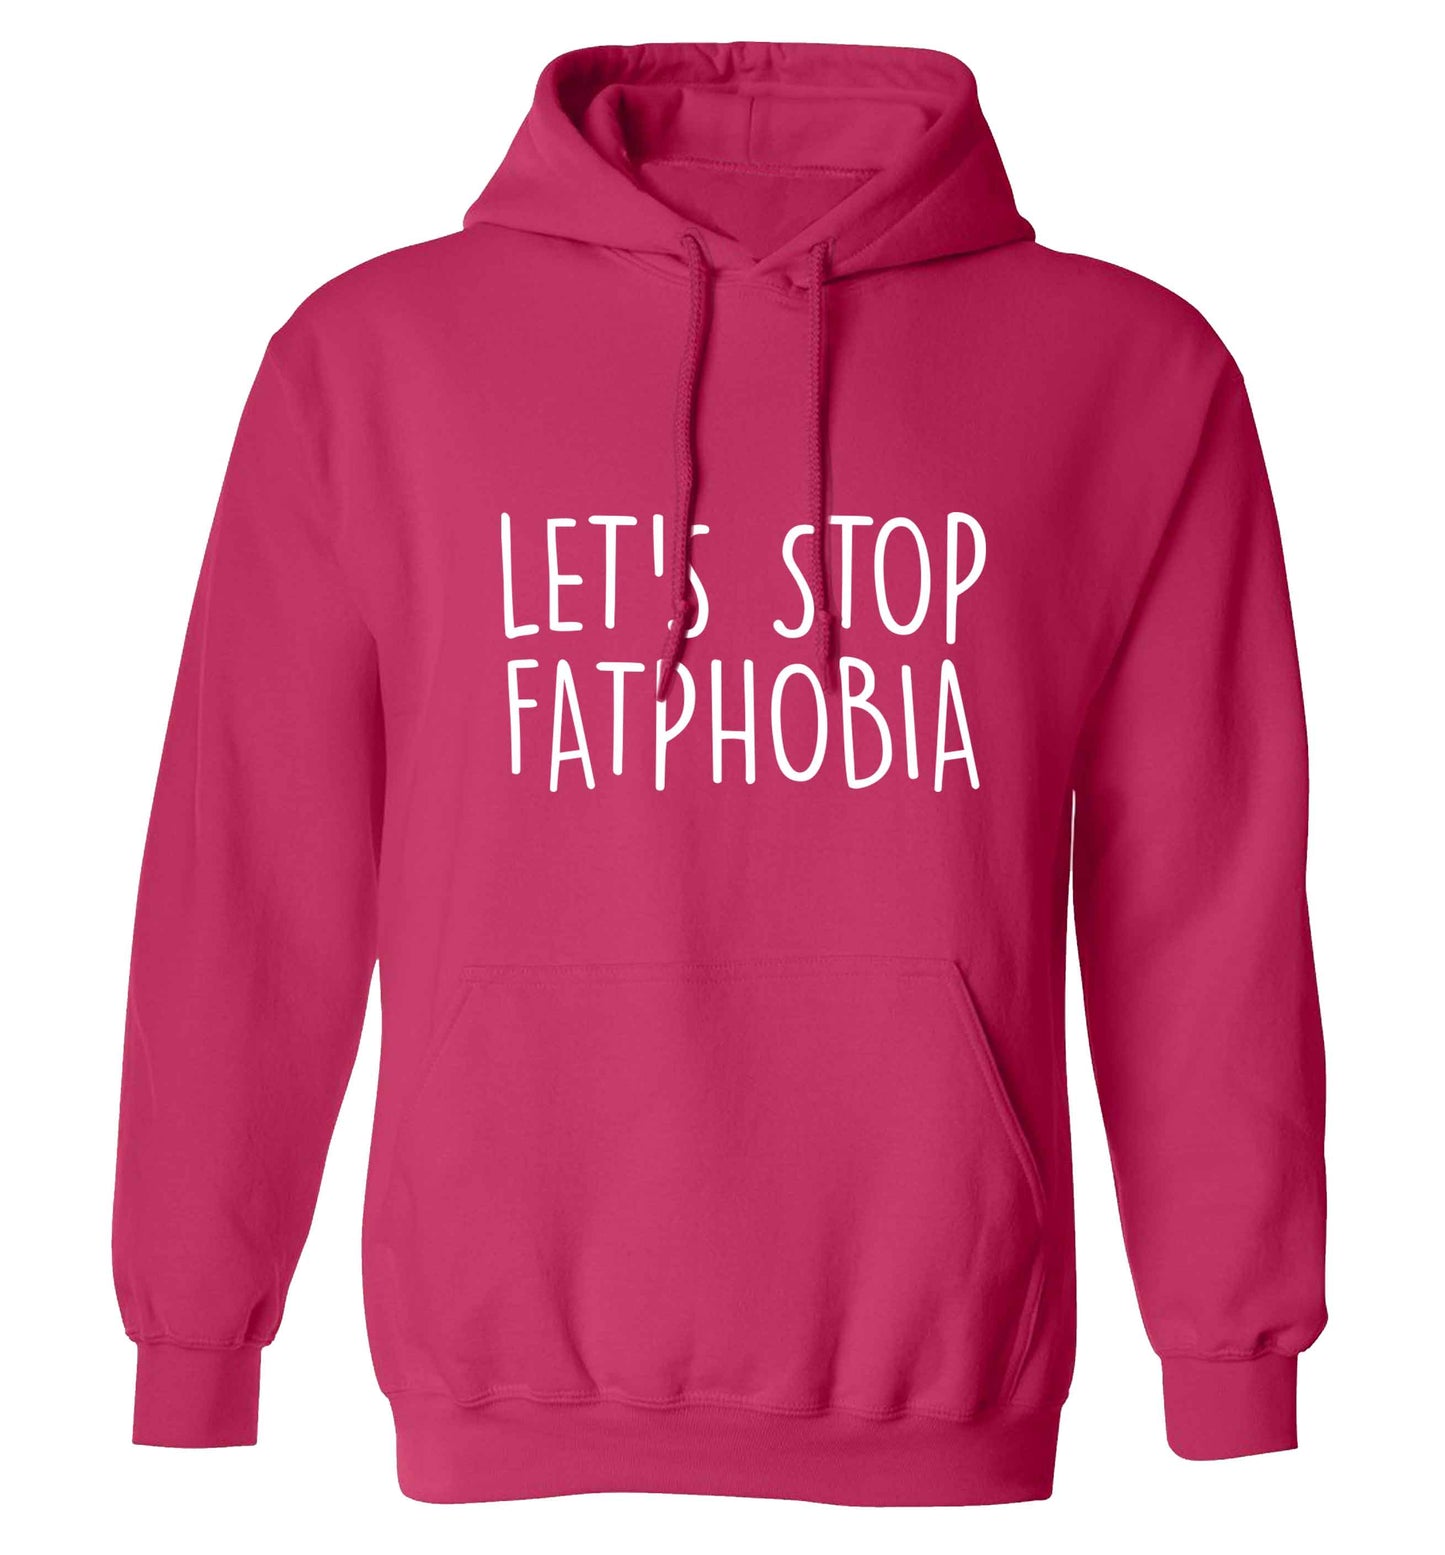 Let's stop fatphobia adults unisex pink hoodie 2XL